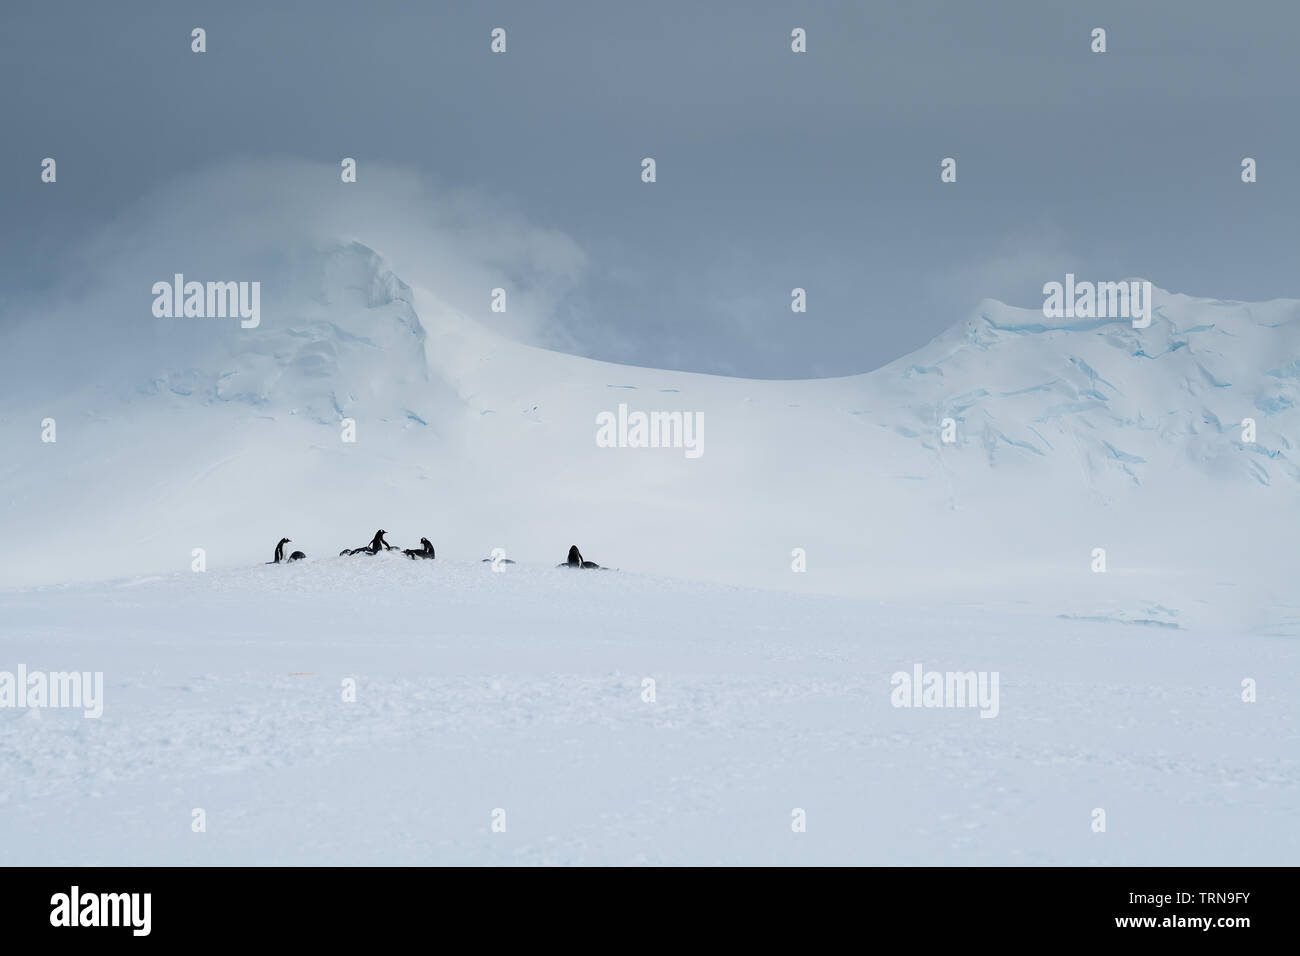 A small group of gentoo penguins on a crest, below snowy mountain peaks in Antarctica Stock Photo